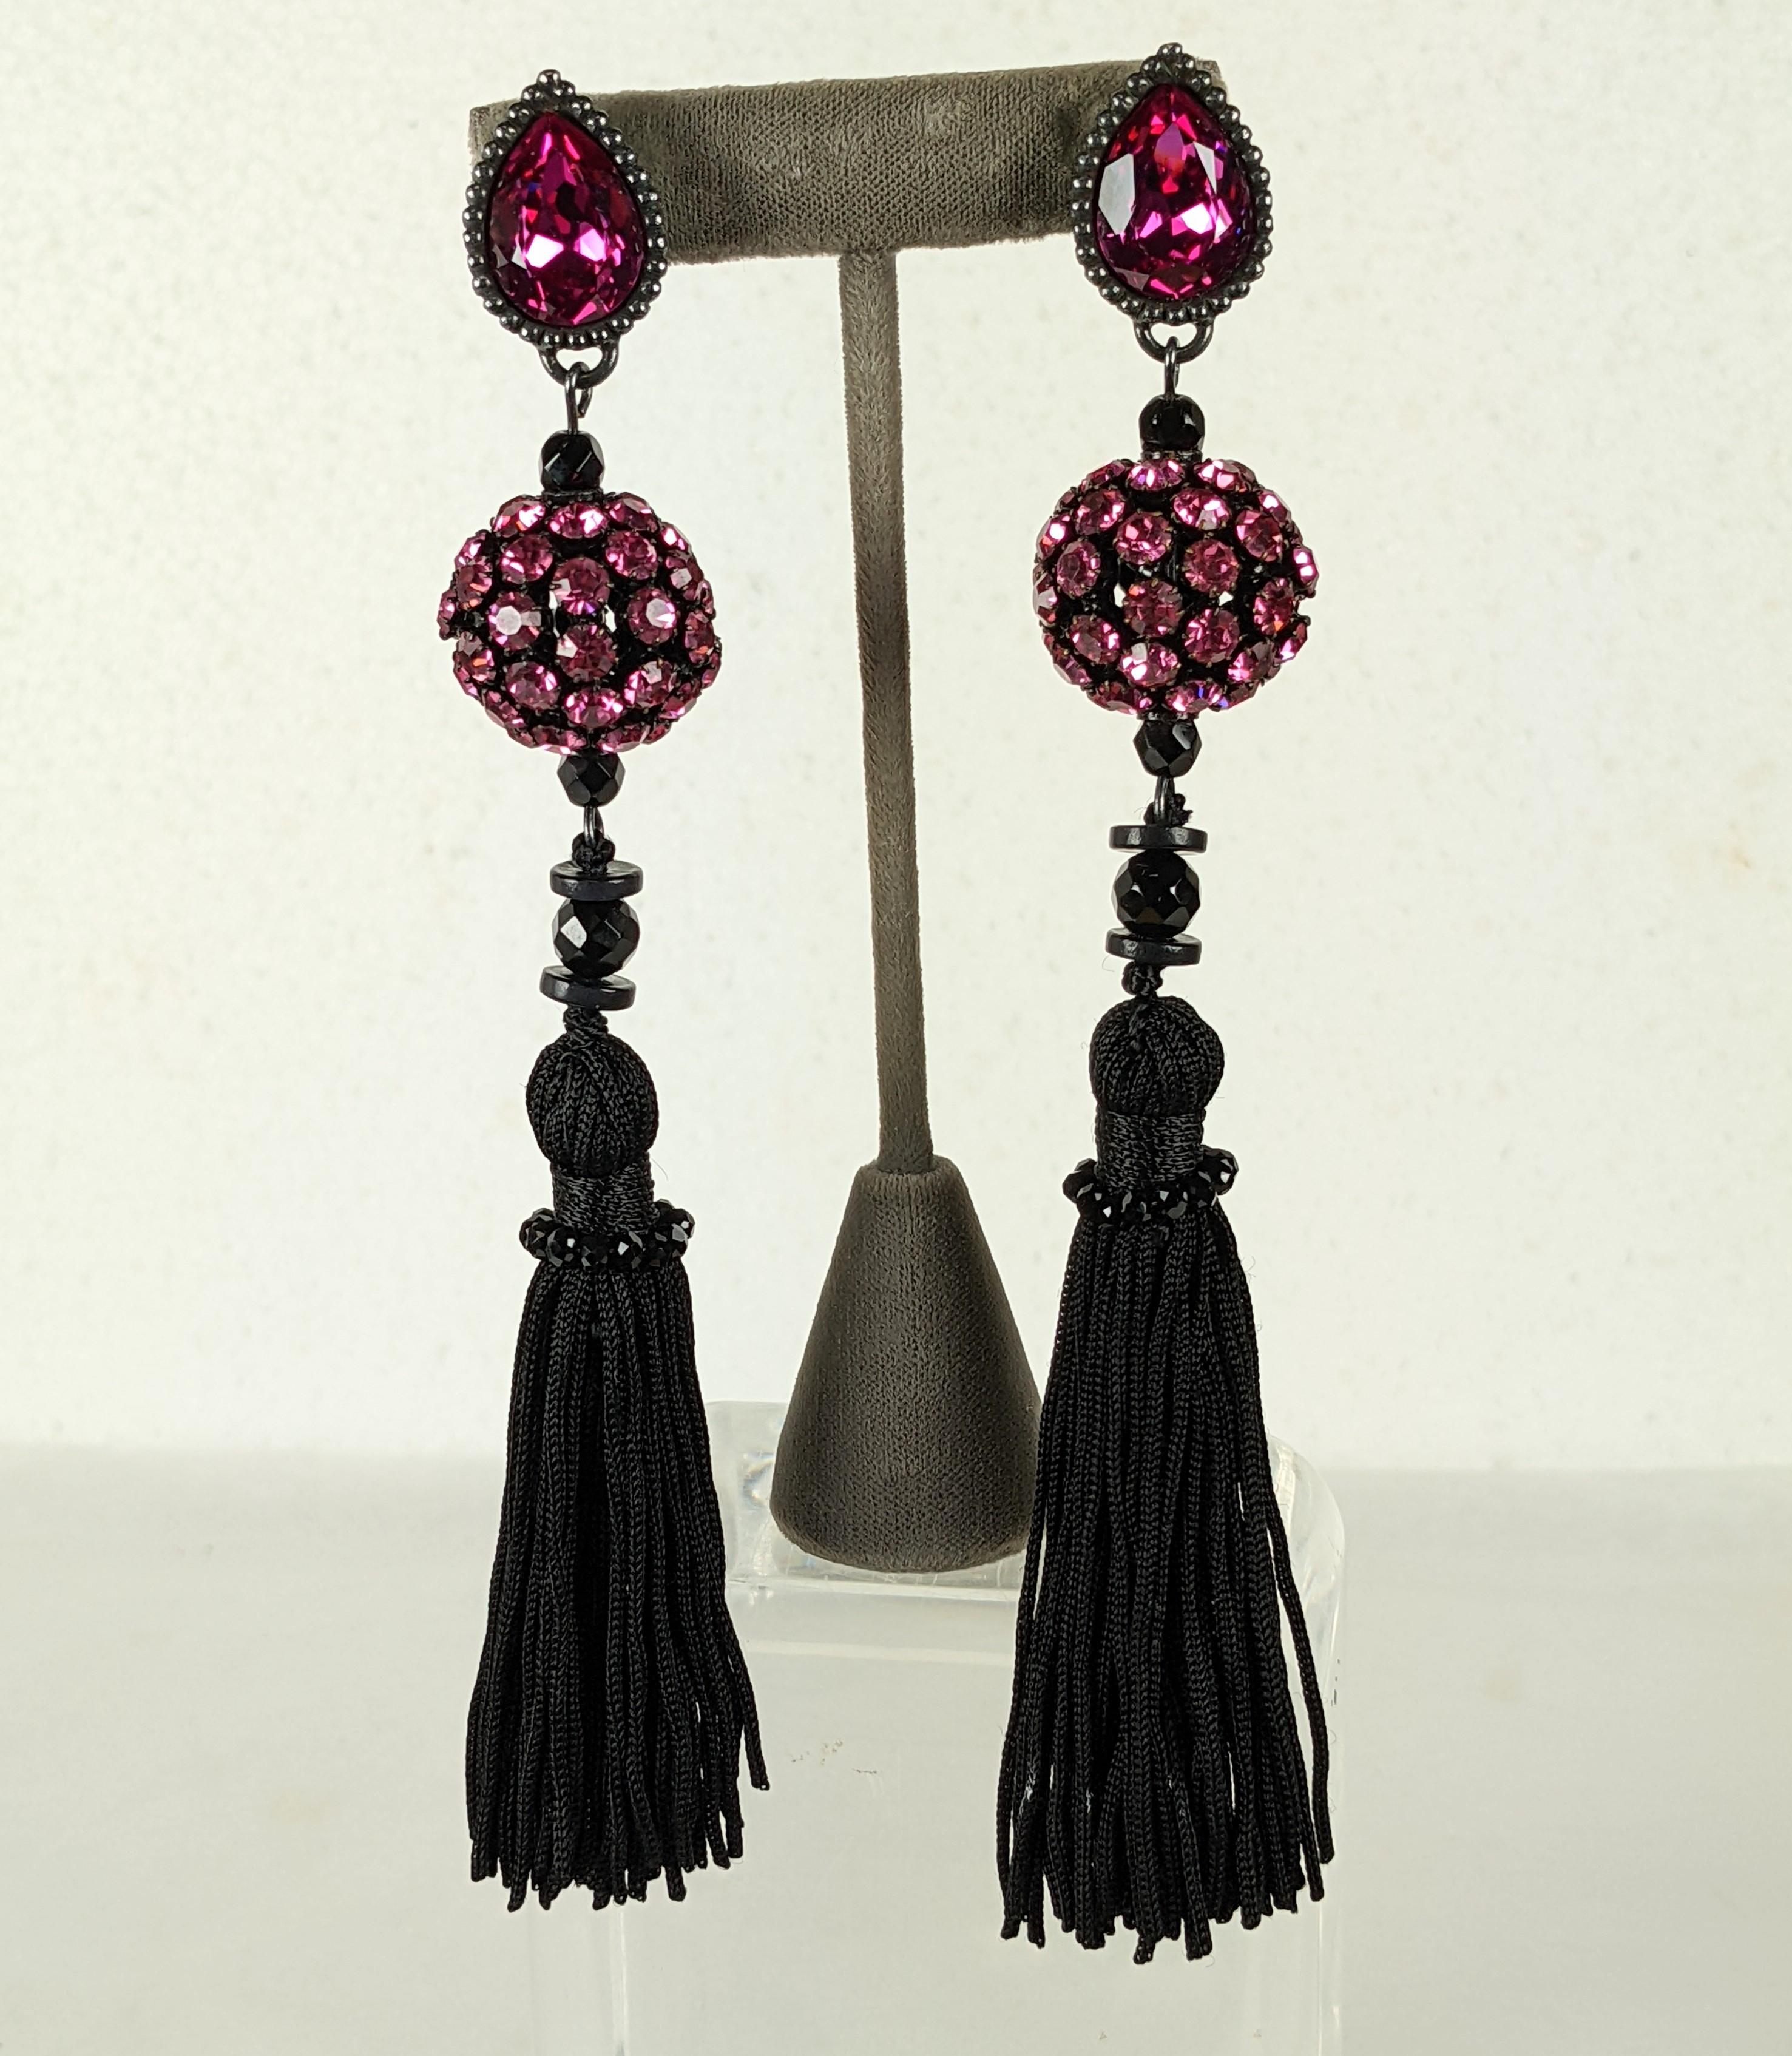 Yves Saint Laurent Rive Gauche Chinese inspired long earrings. Of fuschia and bright pink crystal rhinestones set in blackened antiqued silver and japanned metal. Long silk tassels hand sewn with minute jet beads.
Excellent Condition, Signed. L